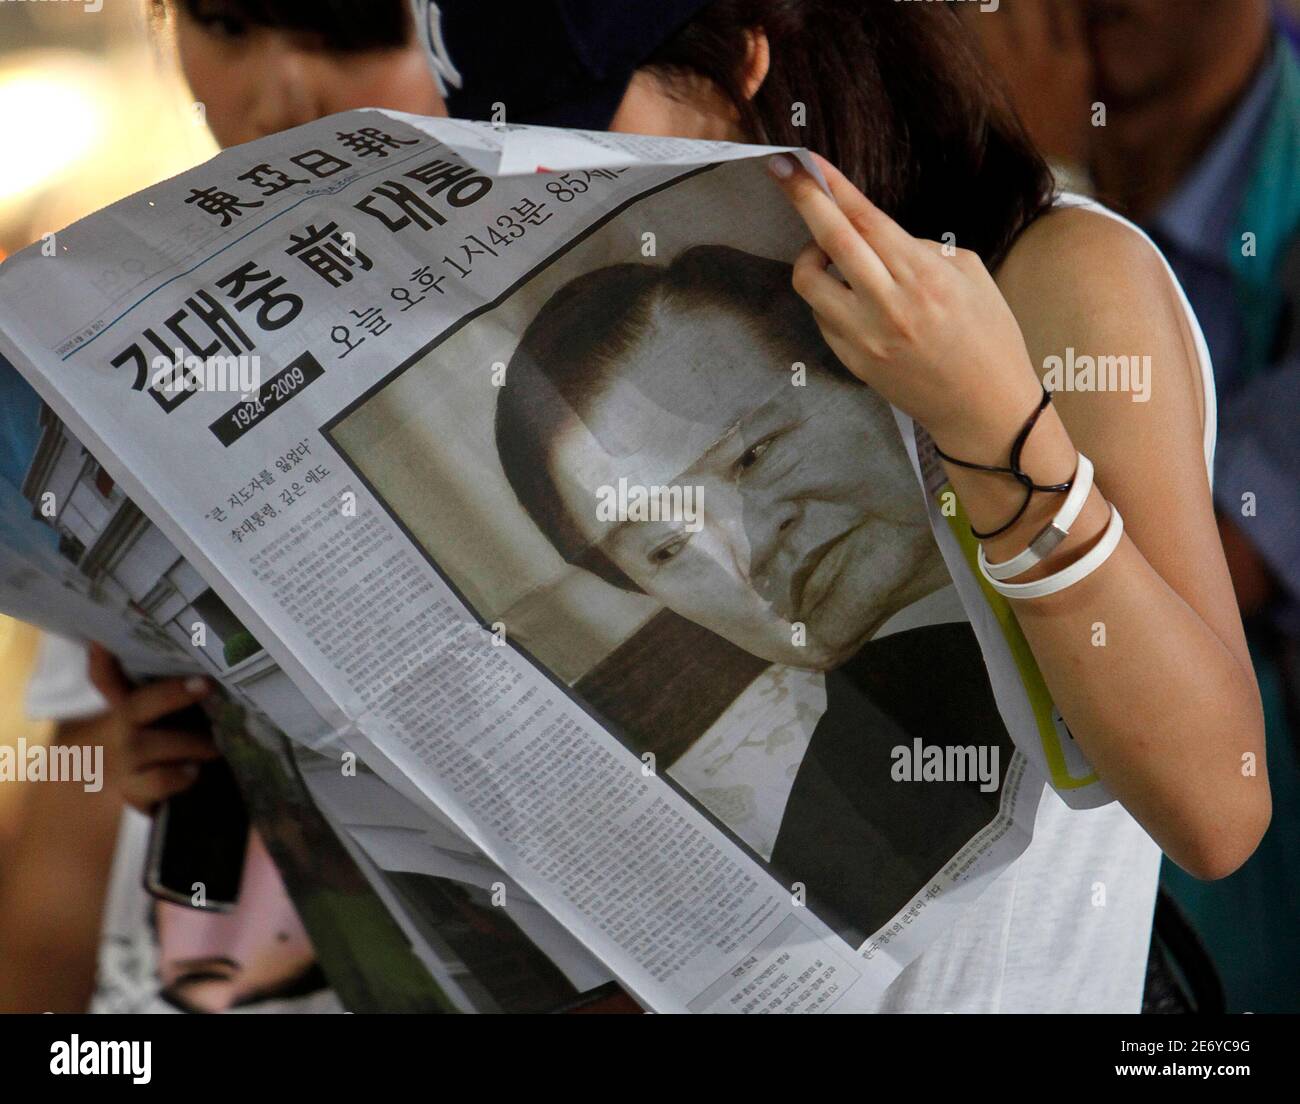 Women read an extra edition of a newspaper reporting on former South Korean President Kim Dae-jung's death at the Seoul railway station August 18, 2009. Former South Korean President Kim, a towering figure in South Korea's struggle for democracy who won the 2000 Nobel Peace Prize for seeking rapprochement with the communist North, died on Tuesday at the age of 85. An official at a Seoul hospital treating Kim for pneumonia confirmed the death.  REUTERS/Jo Yong-Hak (SOUTH KOREA POLITICS OBITUARY) Stock Photo